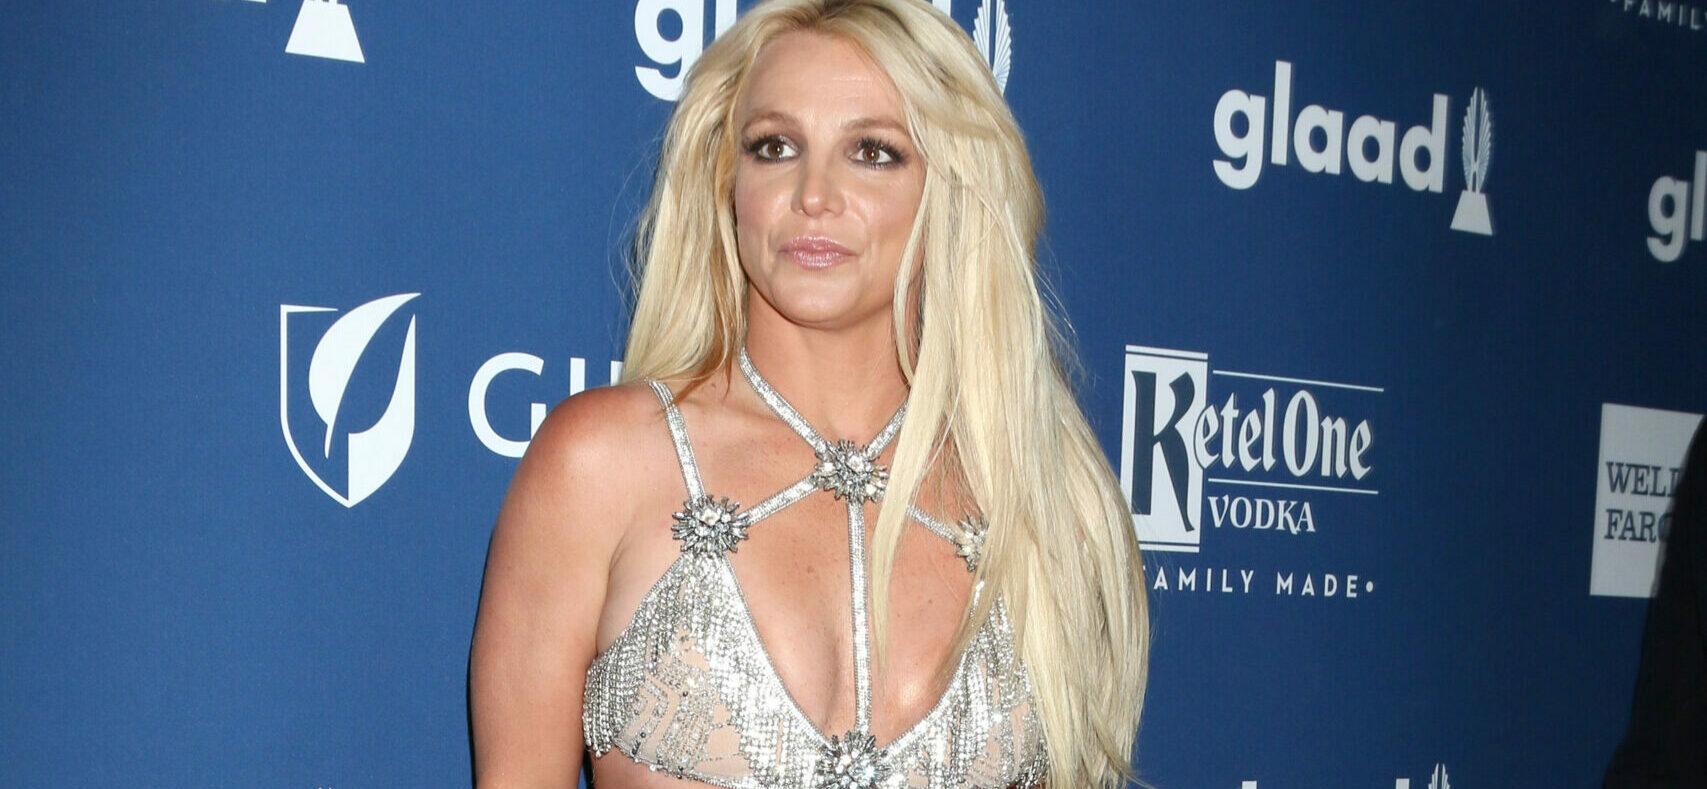 Britney Spears Claims Her Hair Is Longer AFTER She Cut It